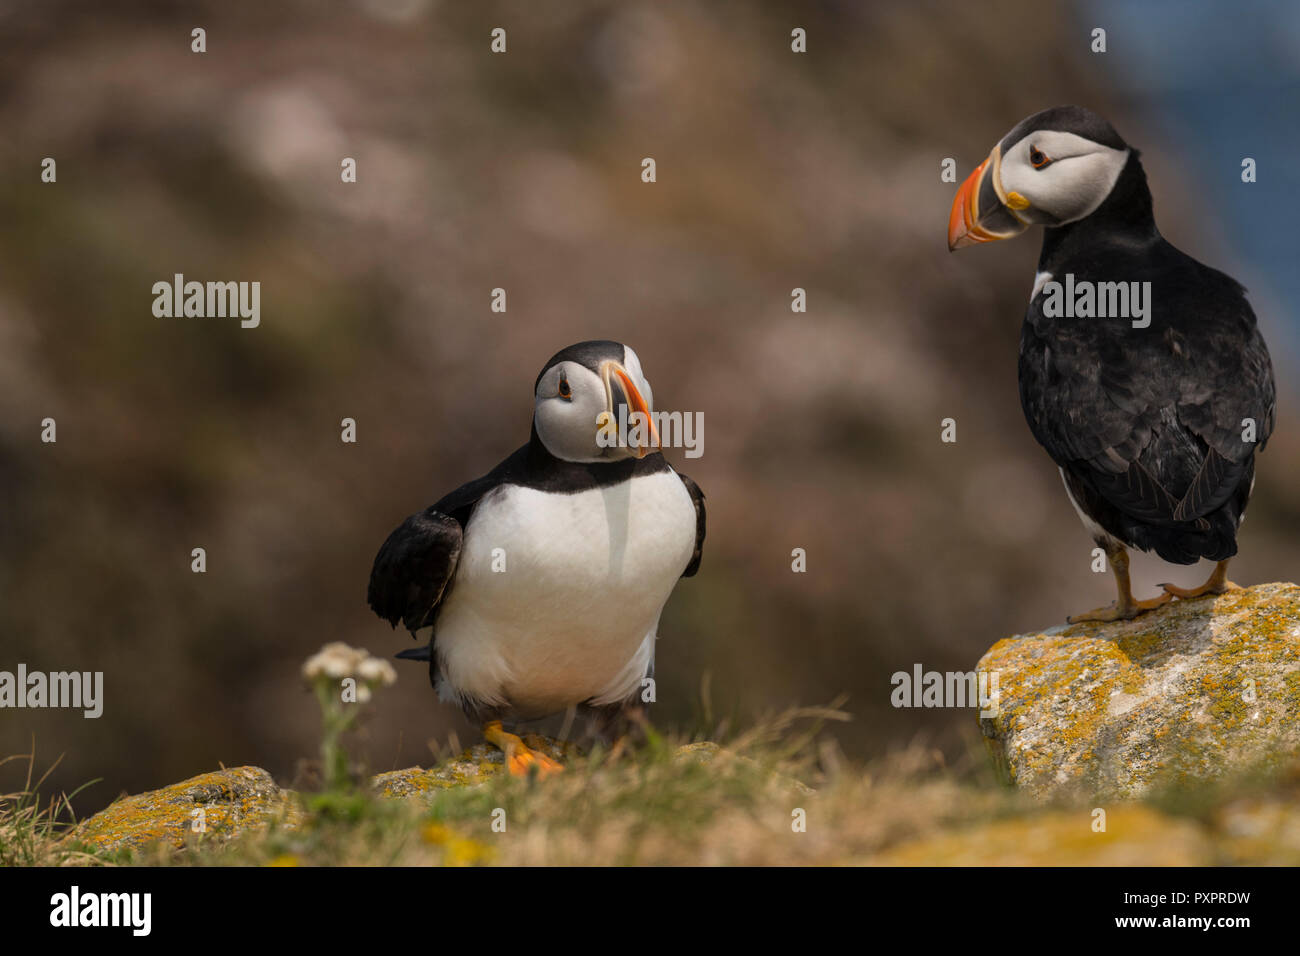 Atlantic Puffin colony at Elliston, Newfoundland, puffins close-up shot. single bird and small social groups Stock Photo